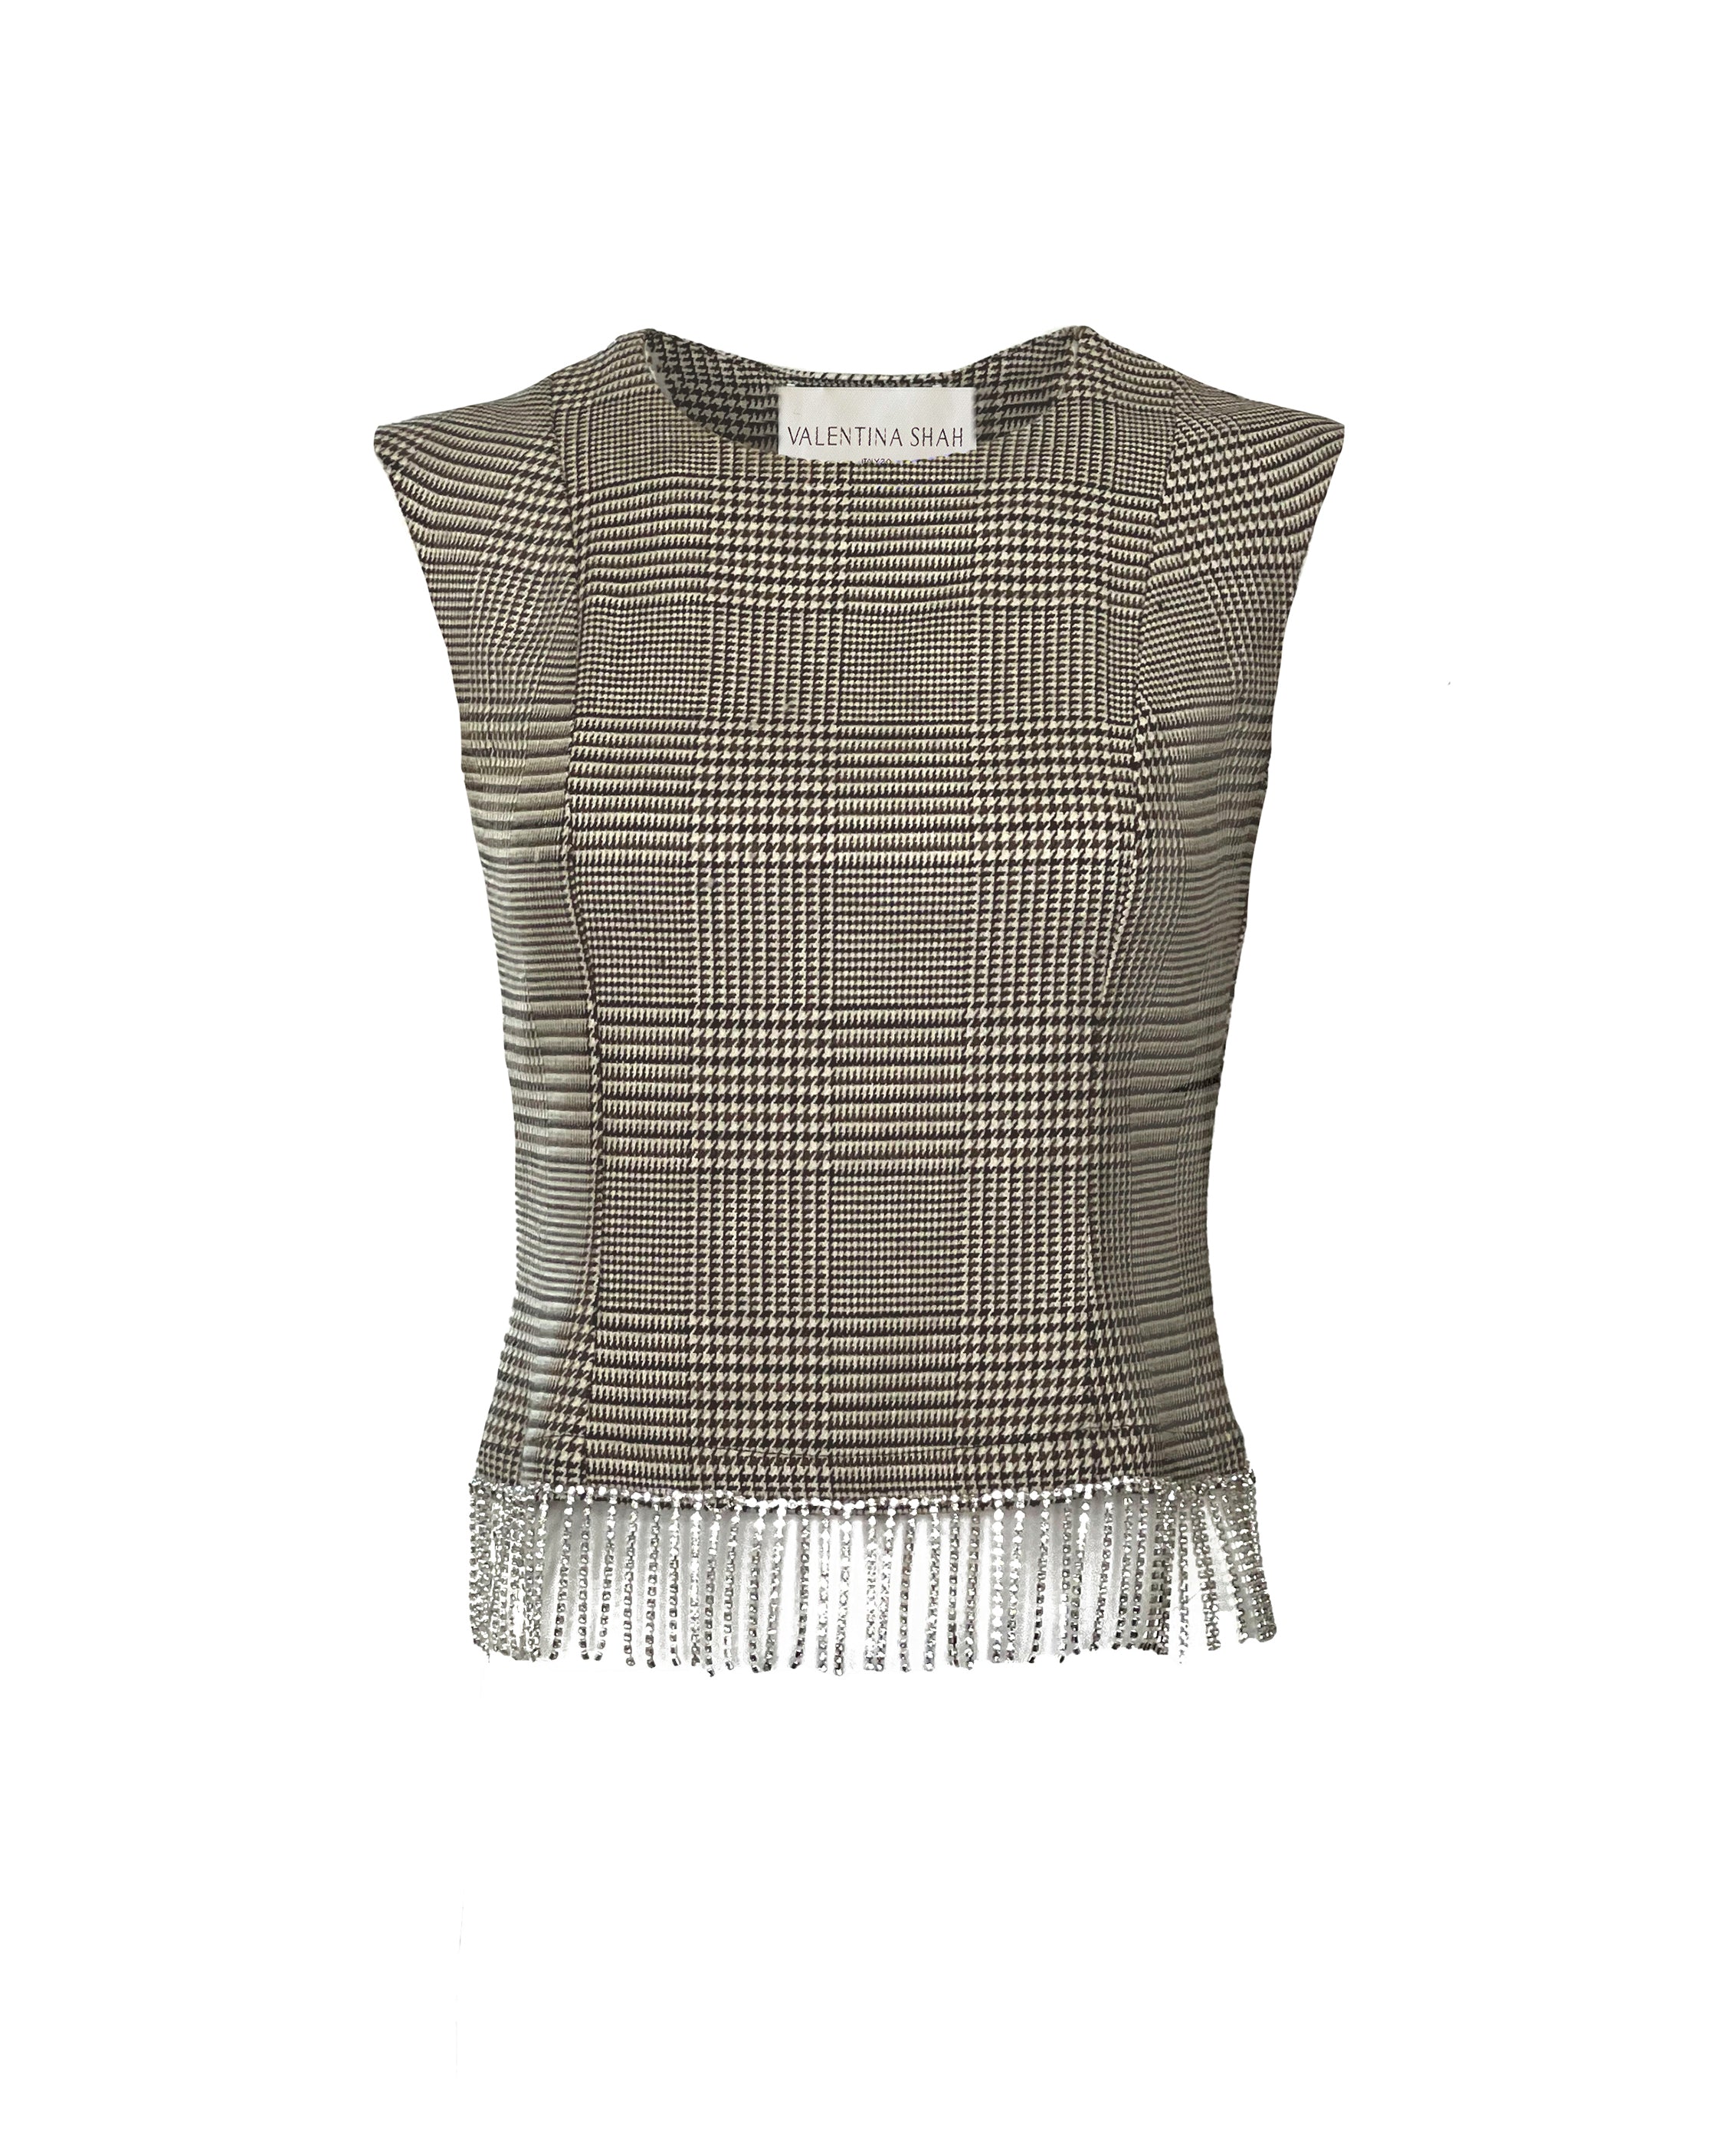 TABETTI TOP- BROWN HOUNDSTOOTH WITH CRYSTALS